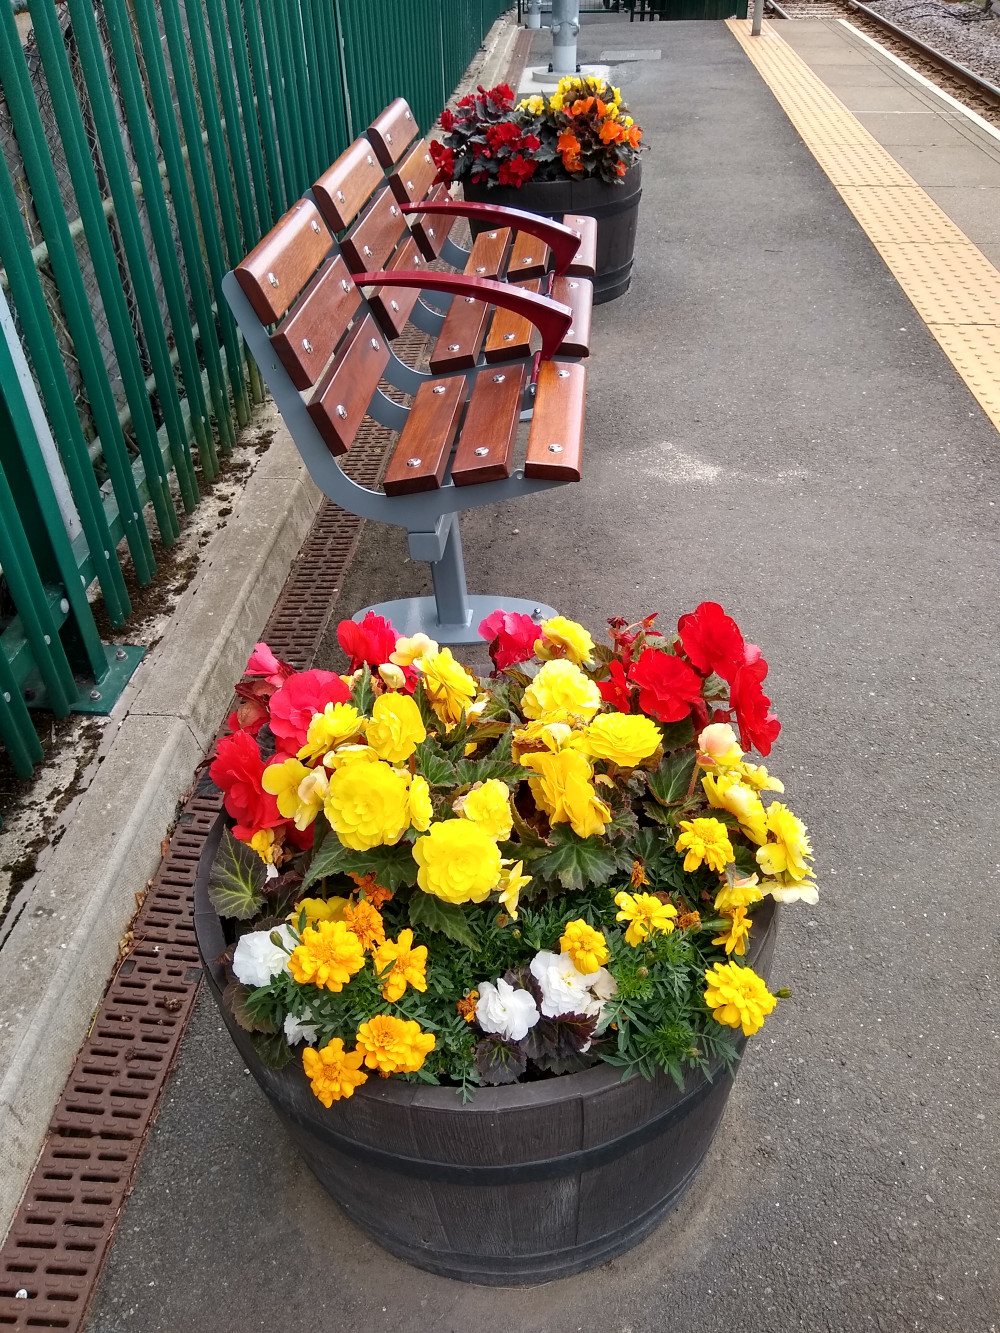 The flower tubs at Brampton station flowers 5 August 2022